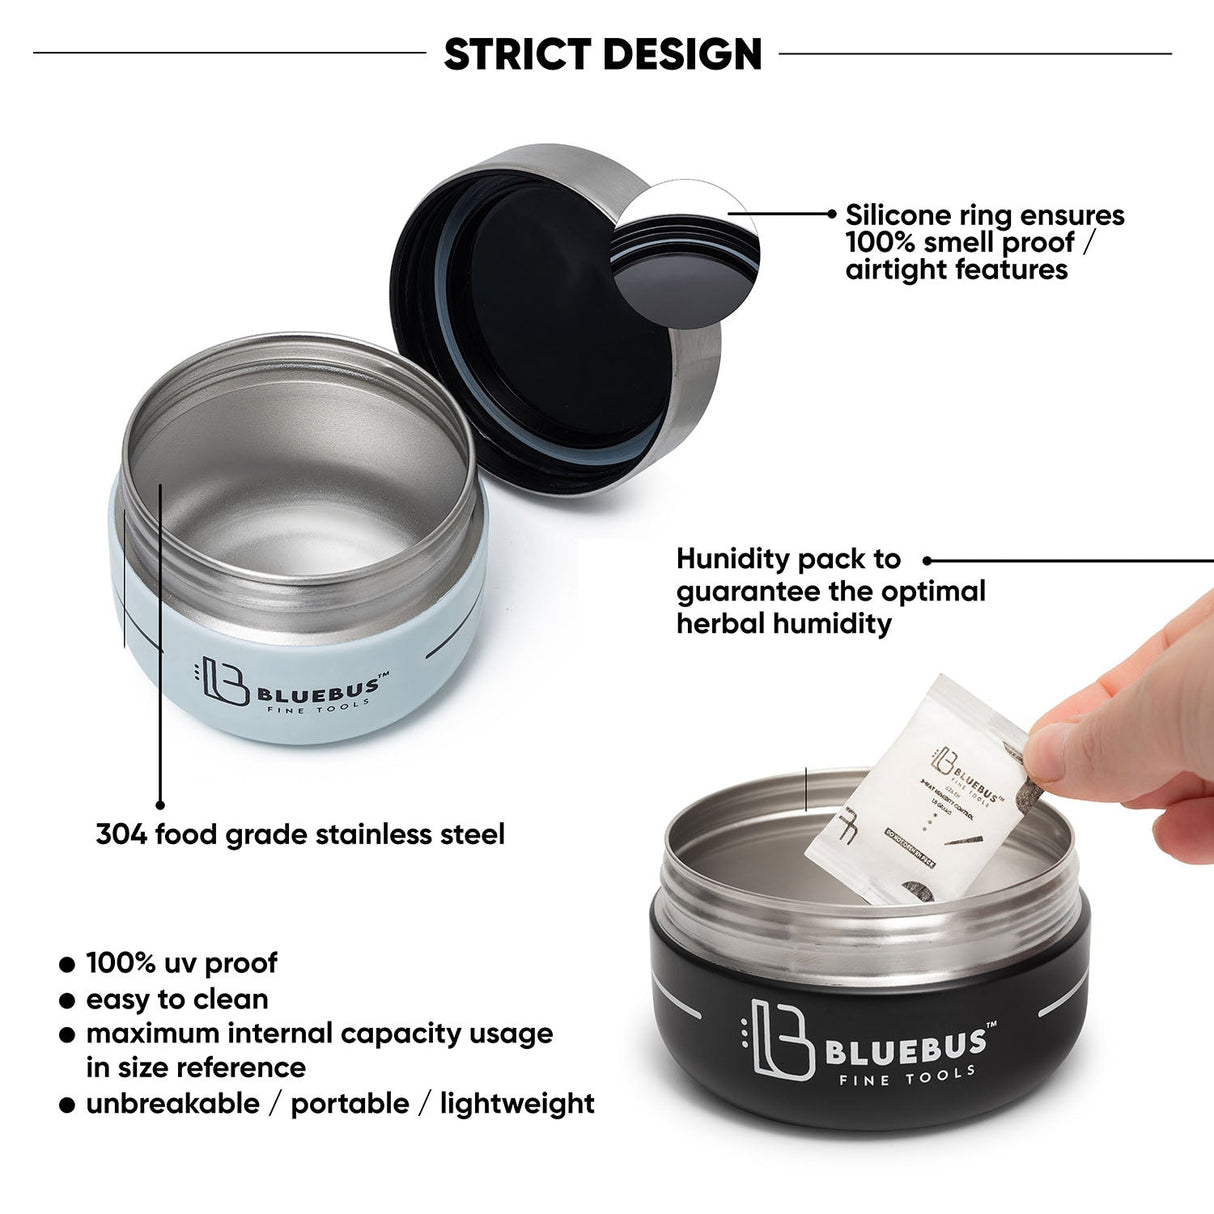 BUNKER Airtight Stash Jar by Blue Bus with silicone seal and humidity pack, made of 304 stainless steel